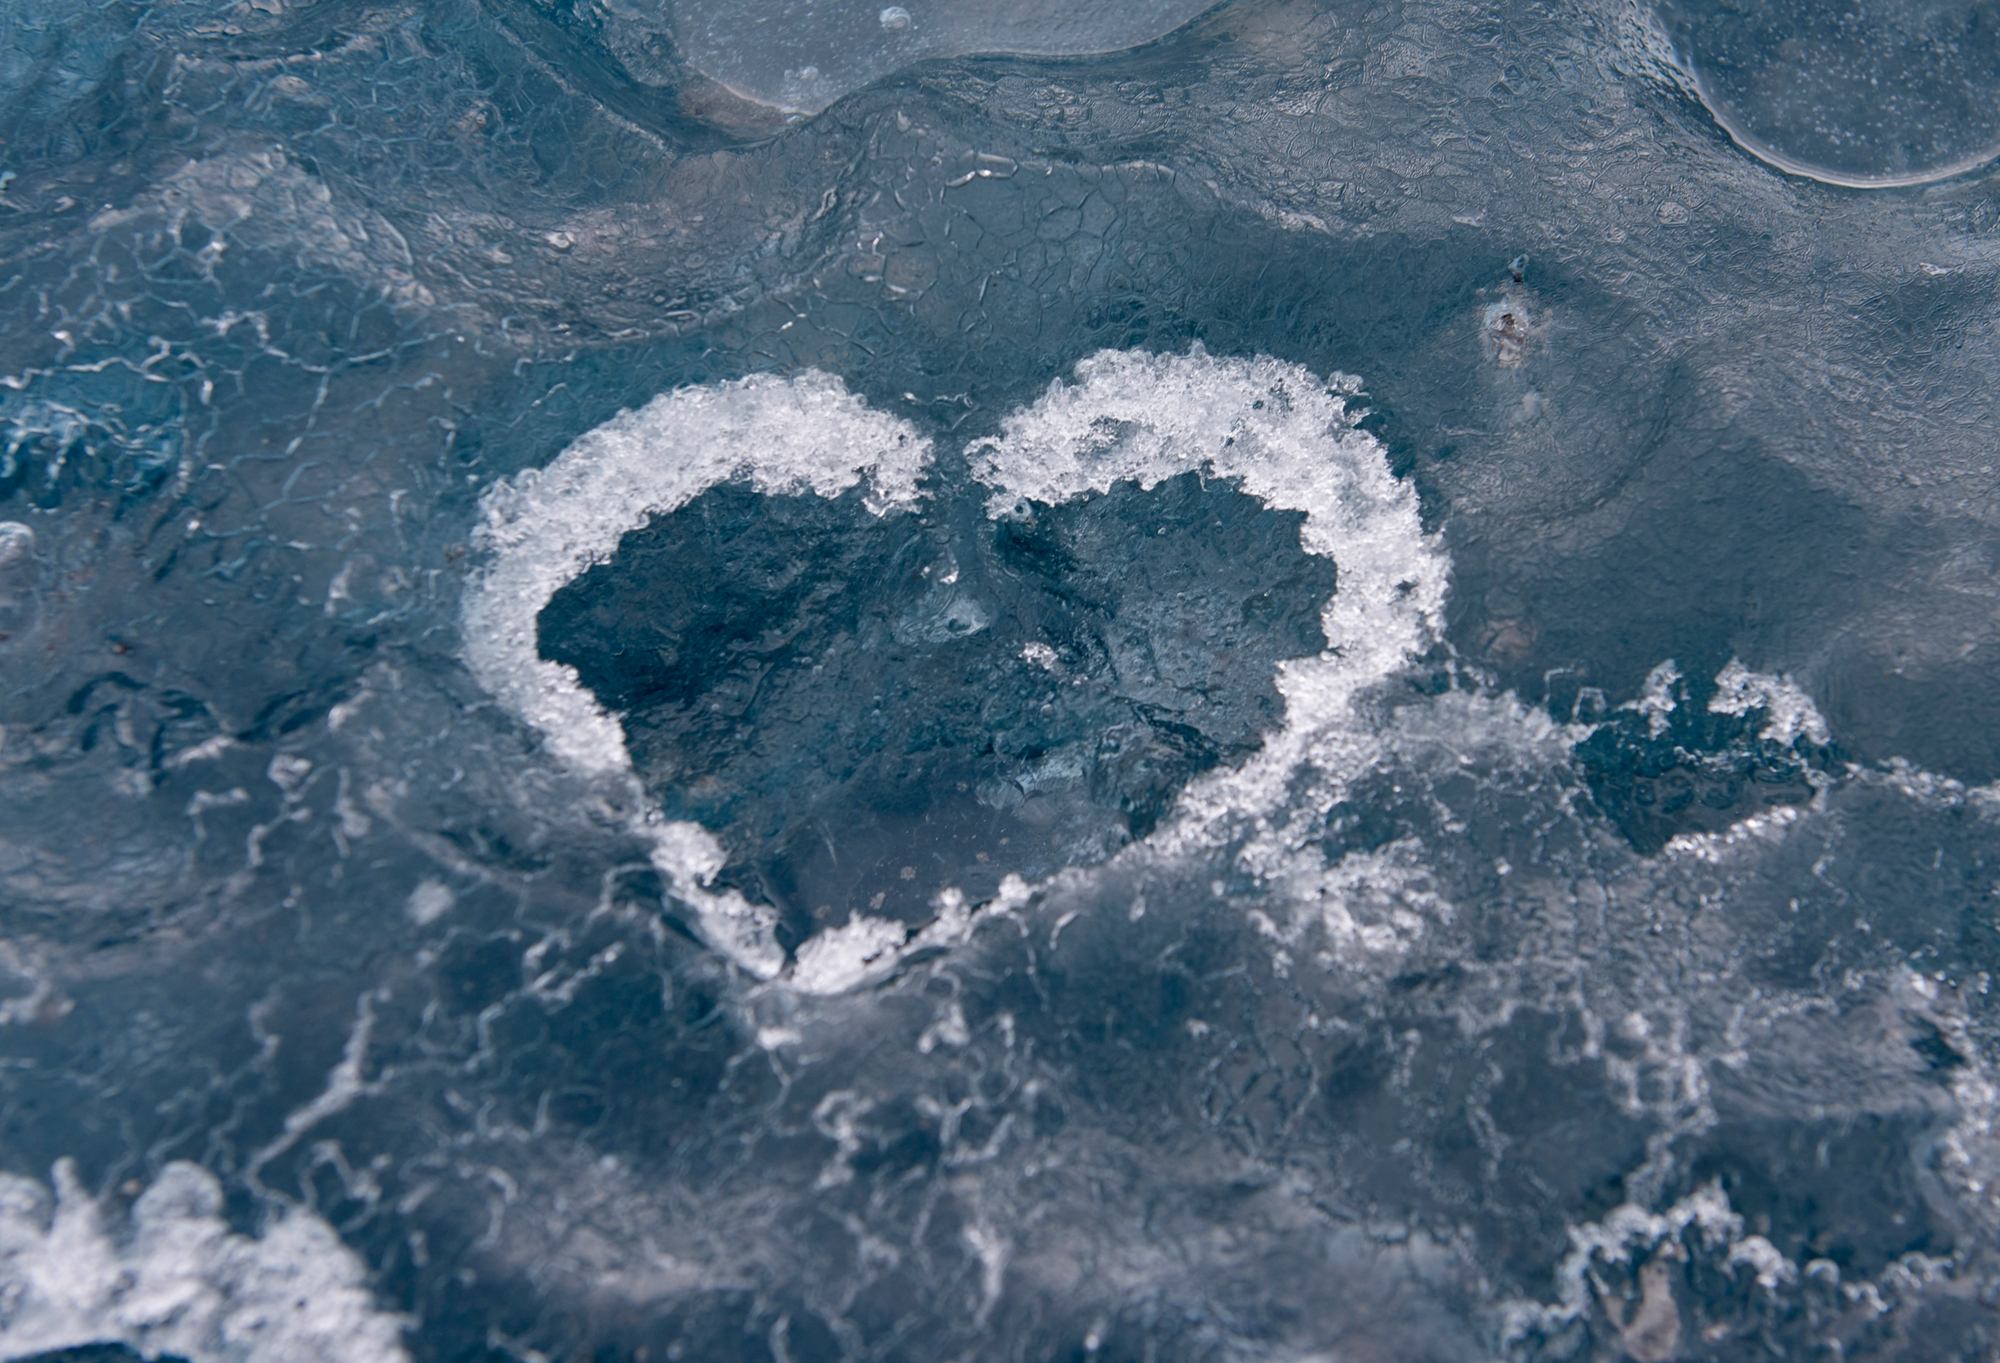 The heart in the ice that Ruslan found us